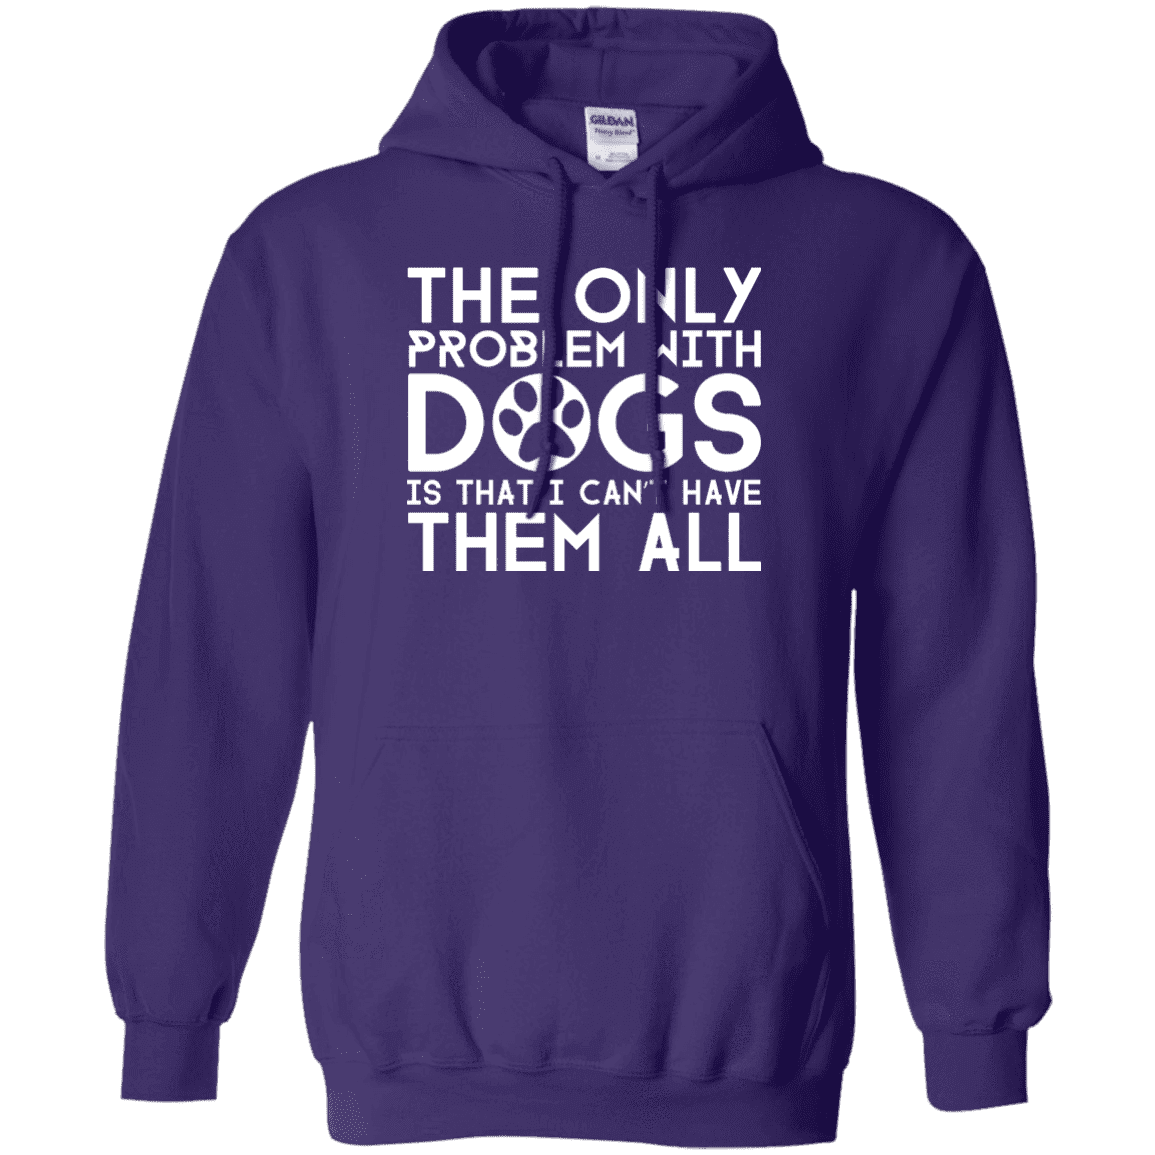 The Only Problem With Dogs - Hoodie.